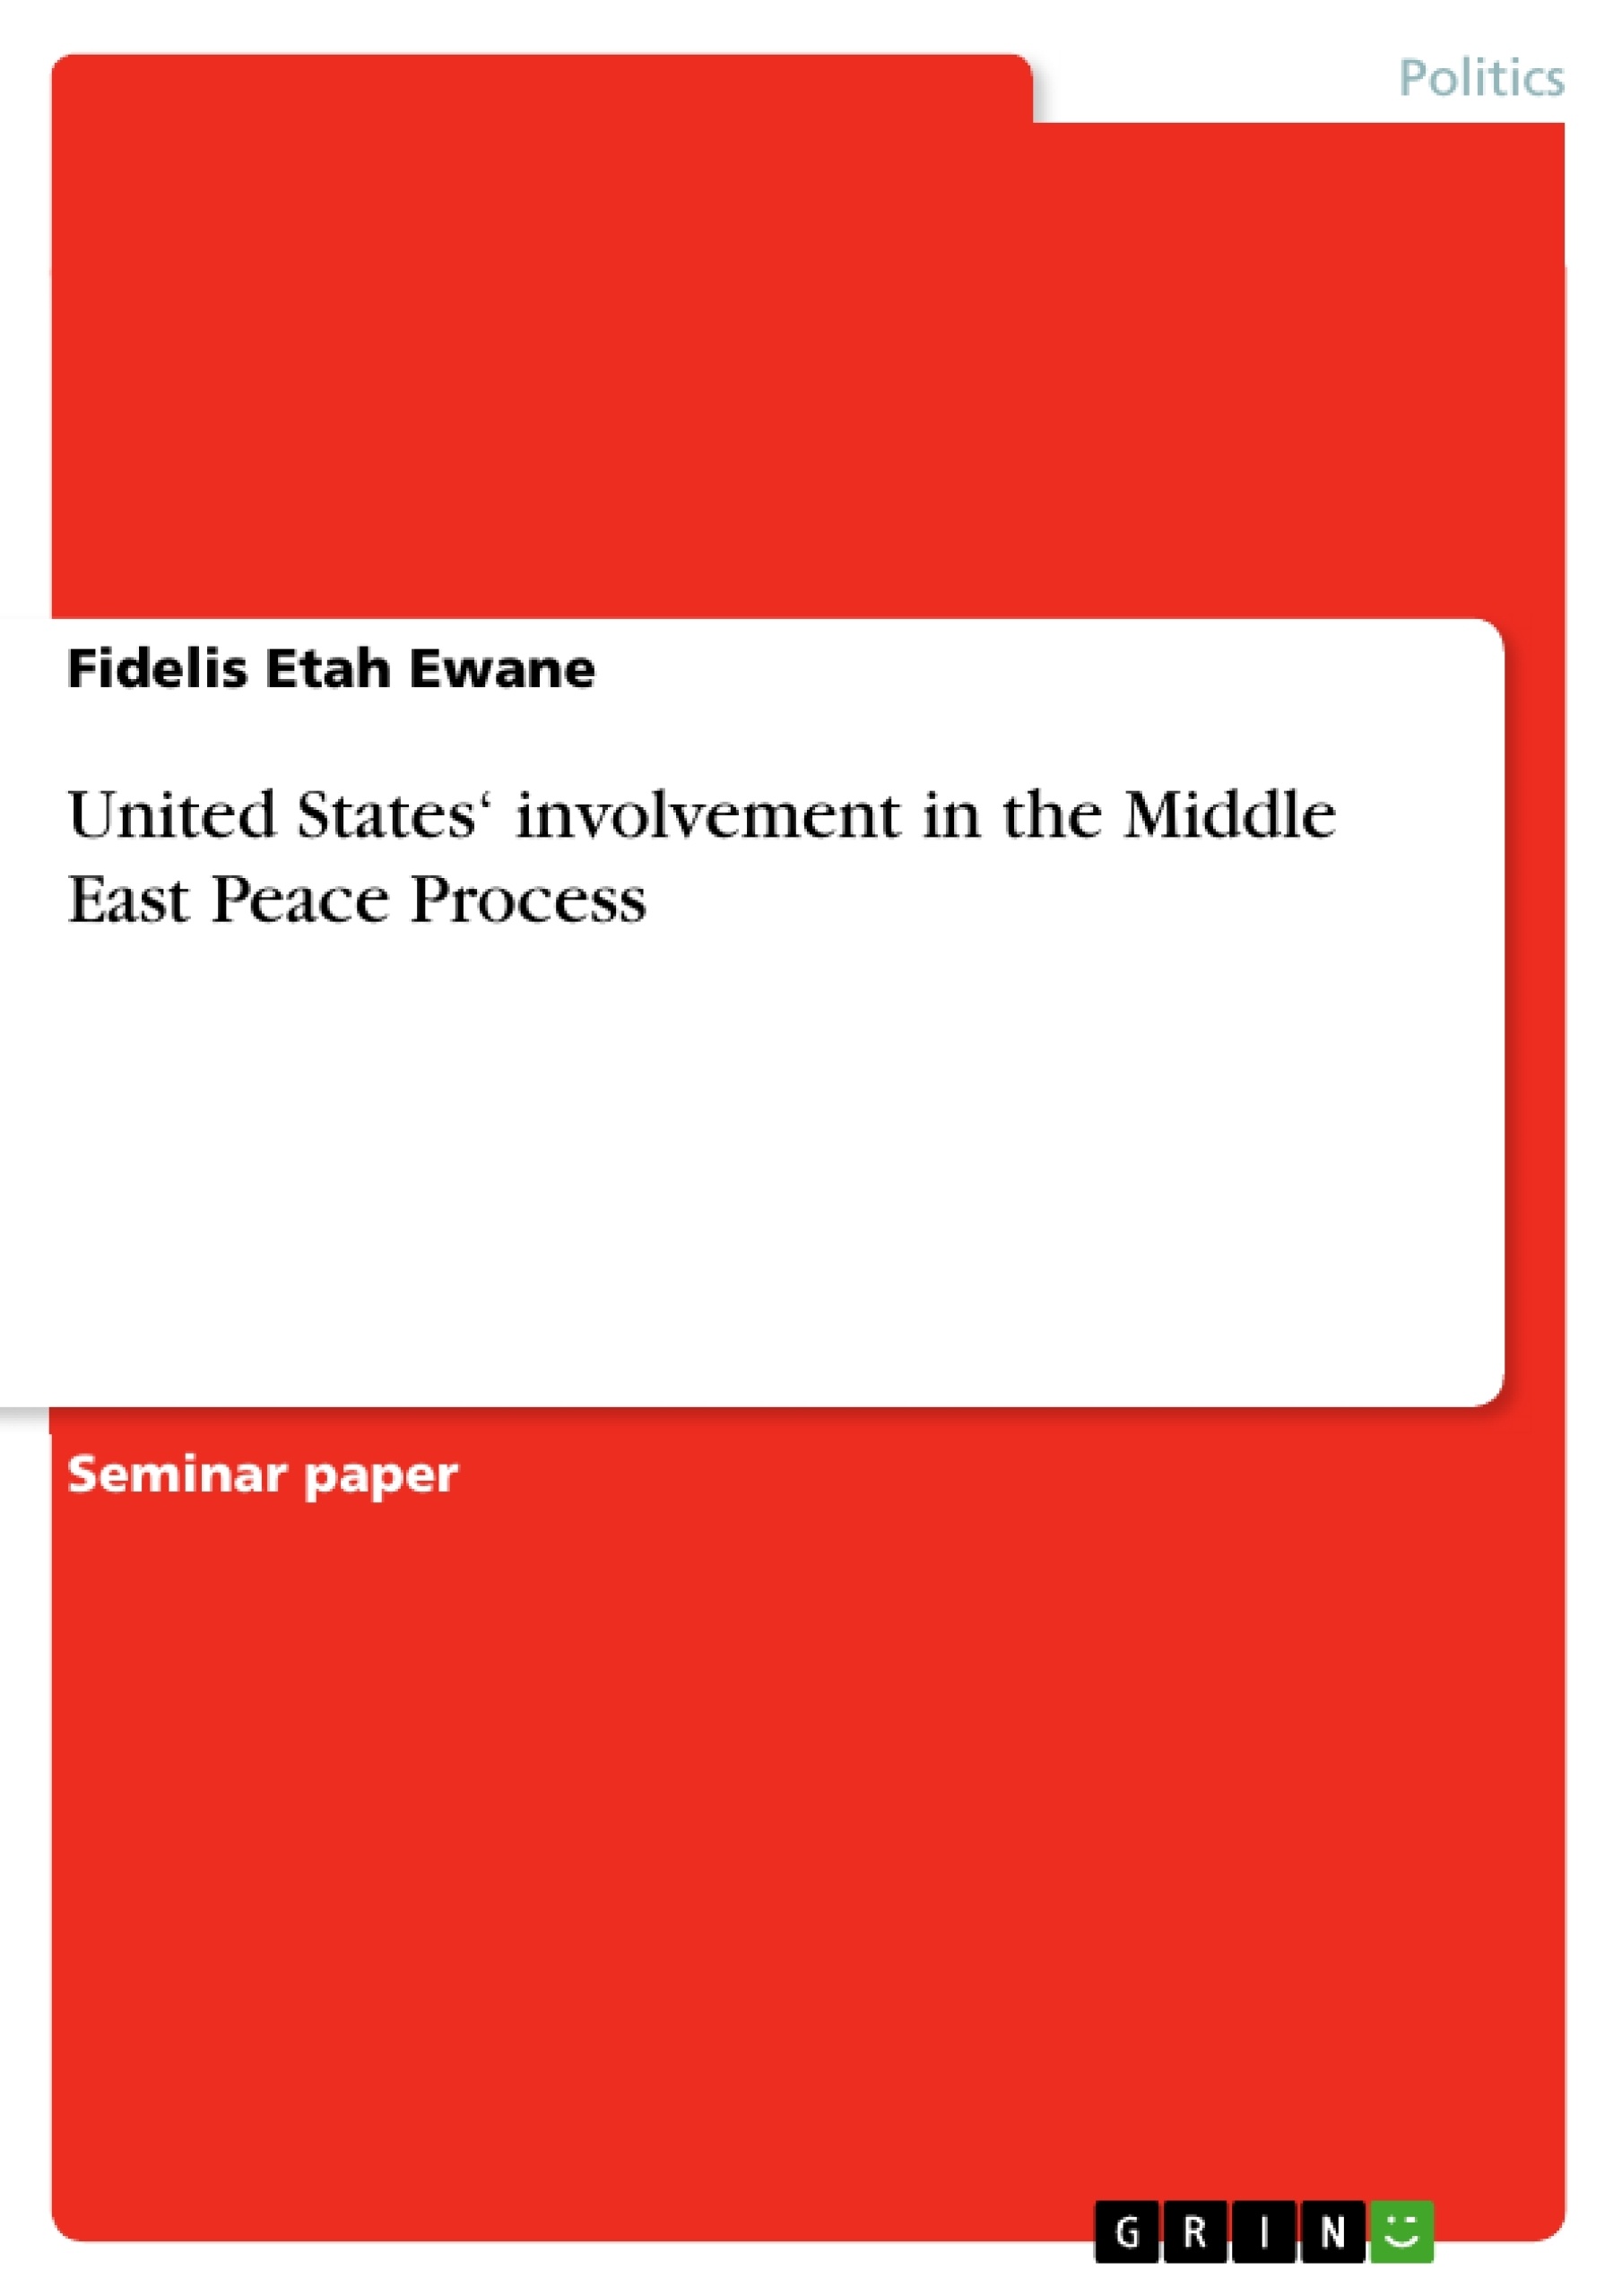 Title: United States‘ involvement in the Middle East Peace Process